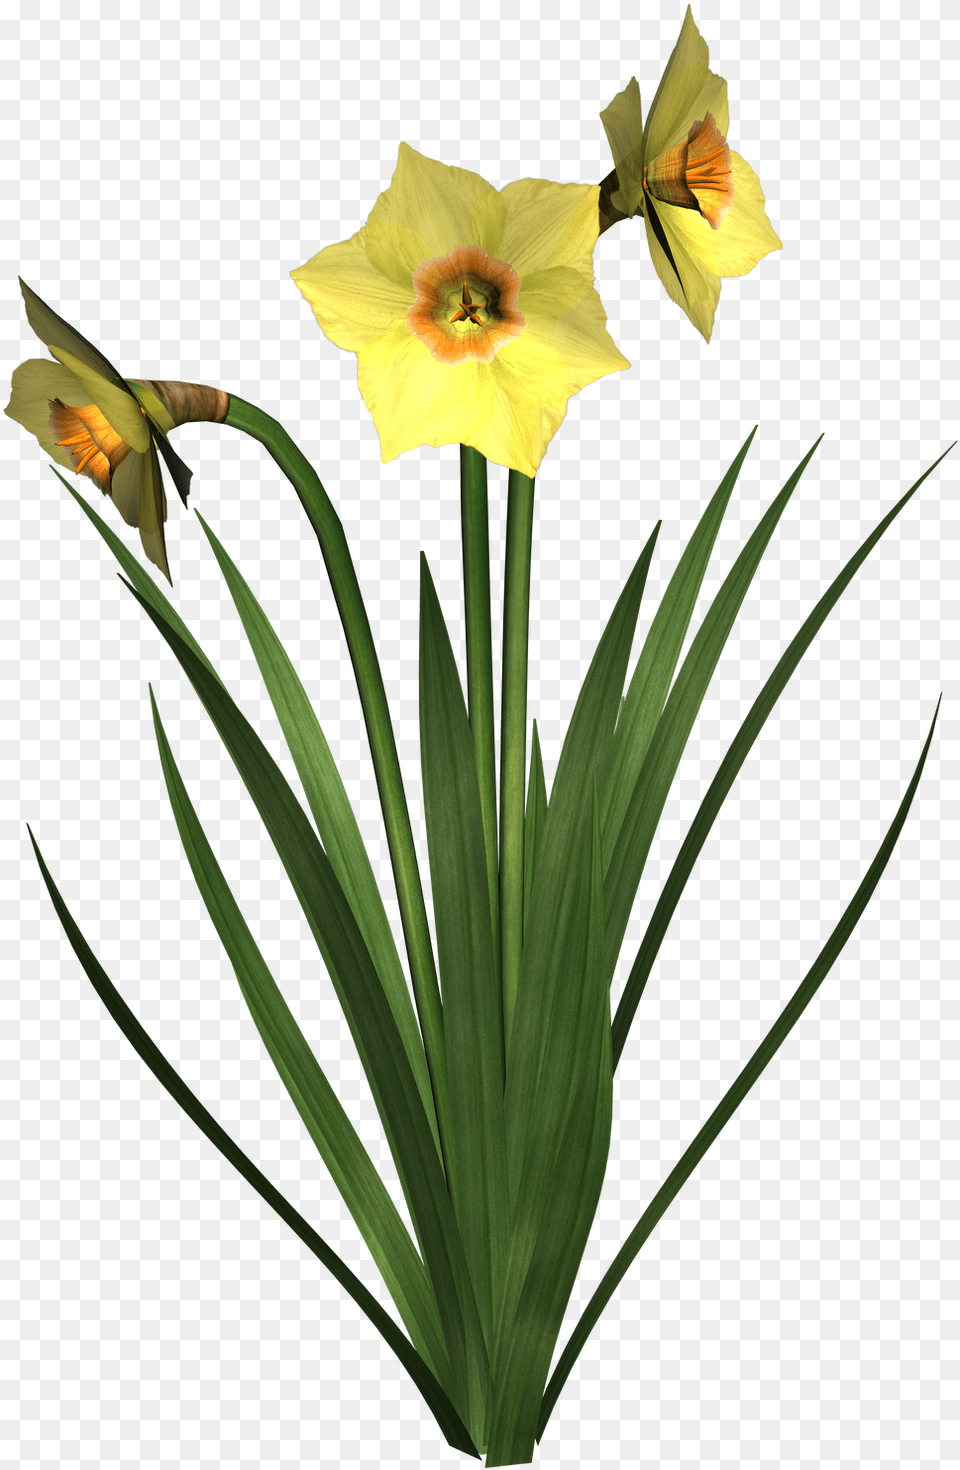 Plants Clipart Transparent Background Daffodil Flower Transparent Background, Plant Png Image